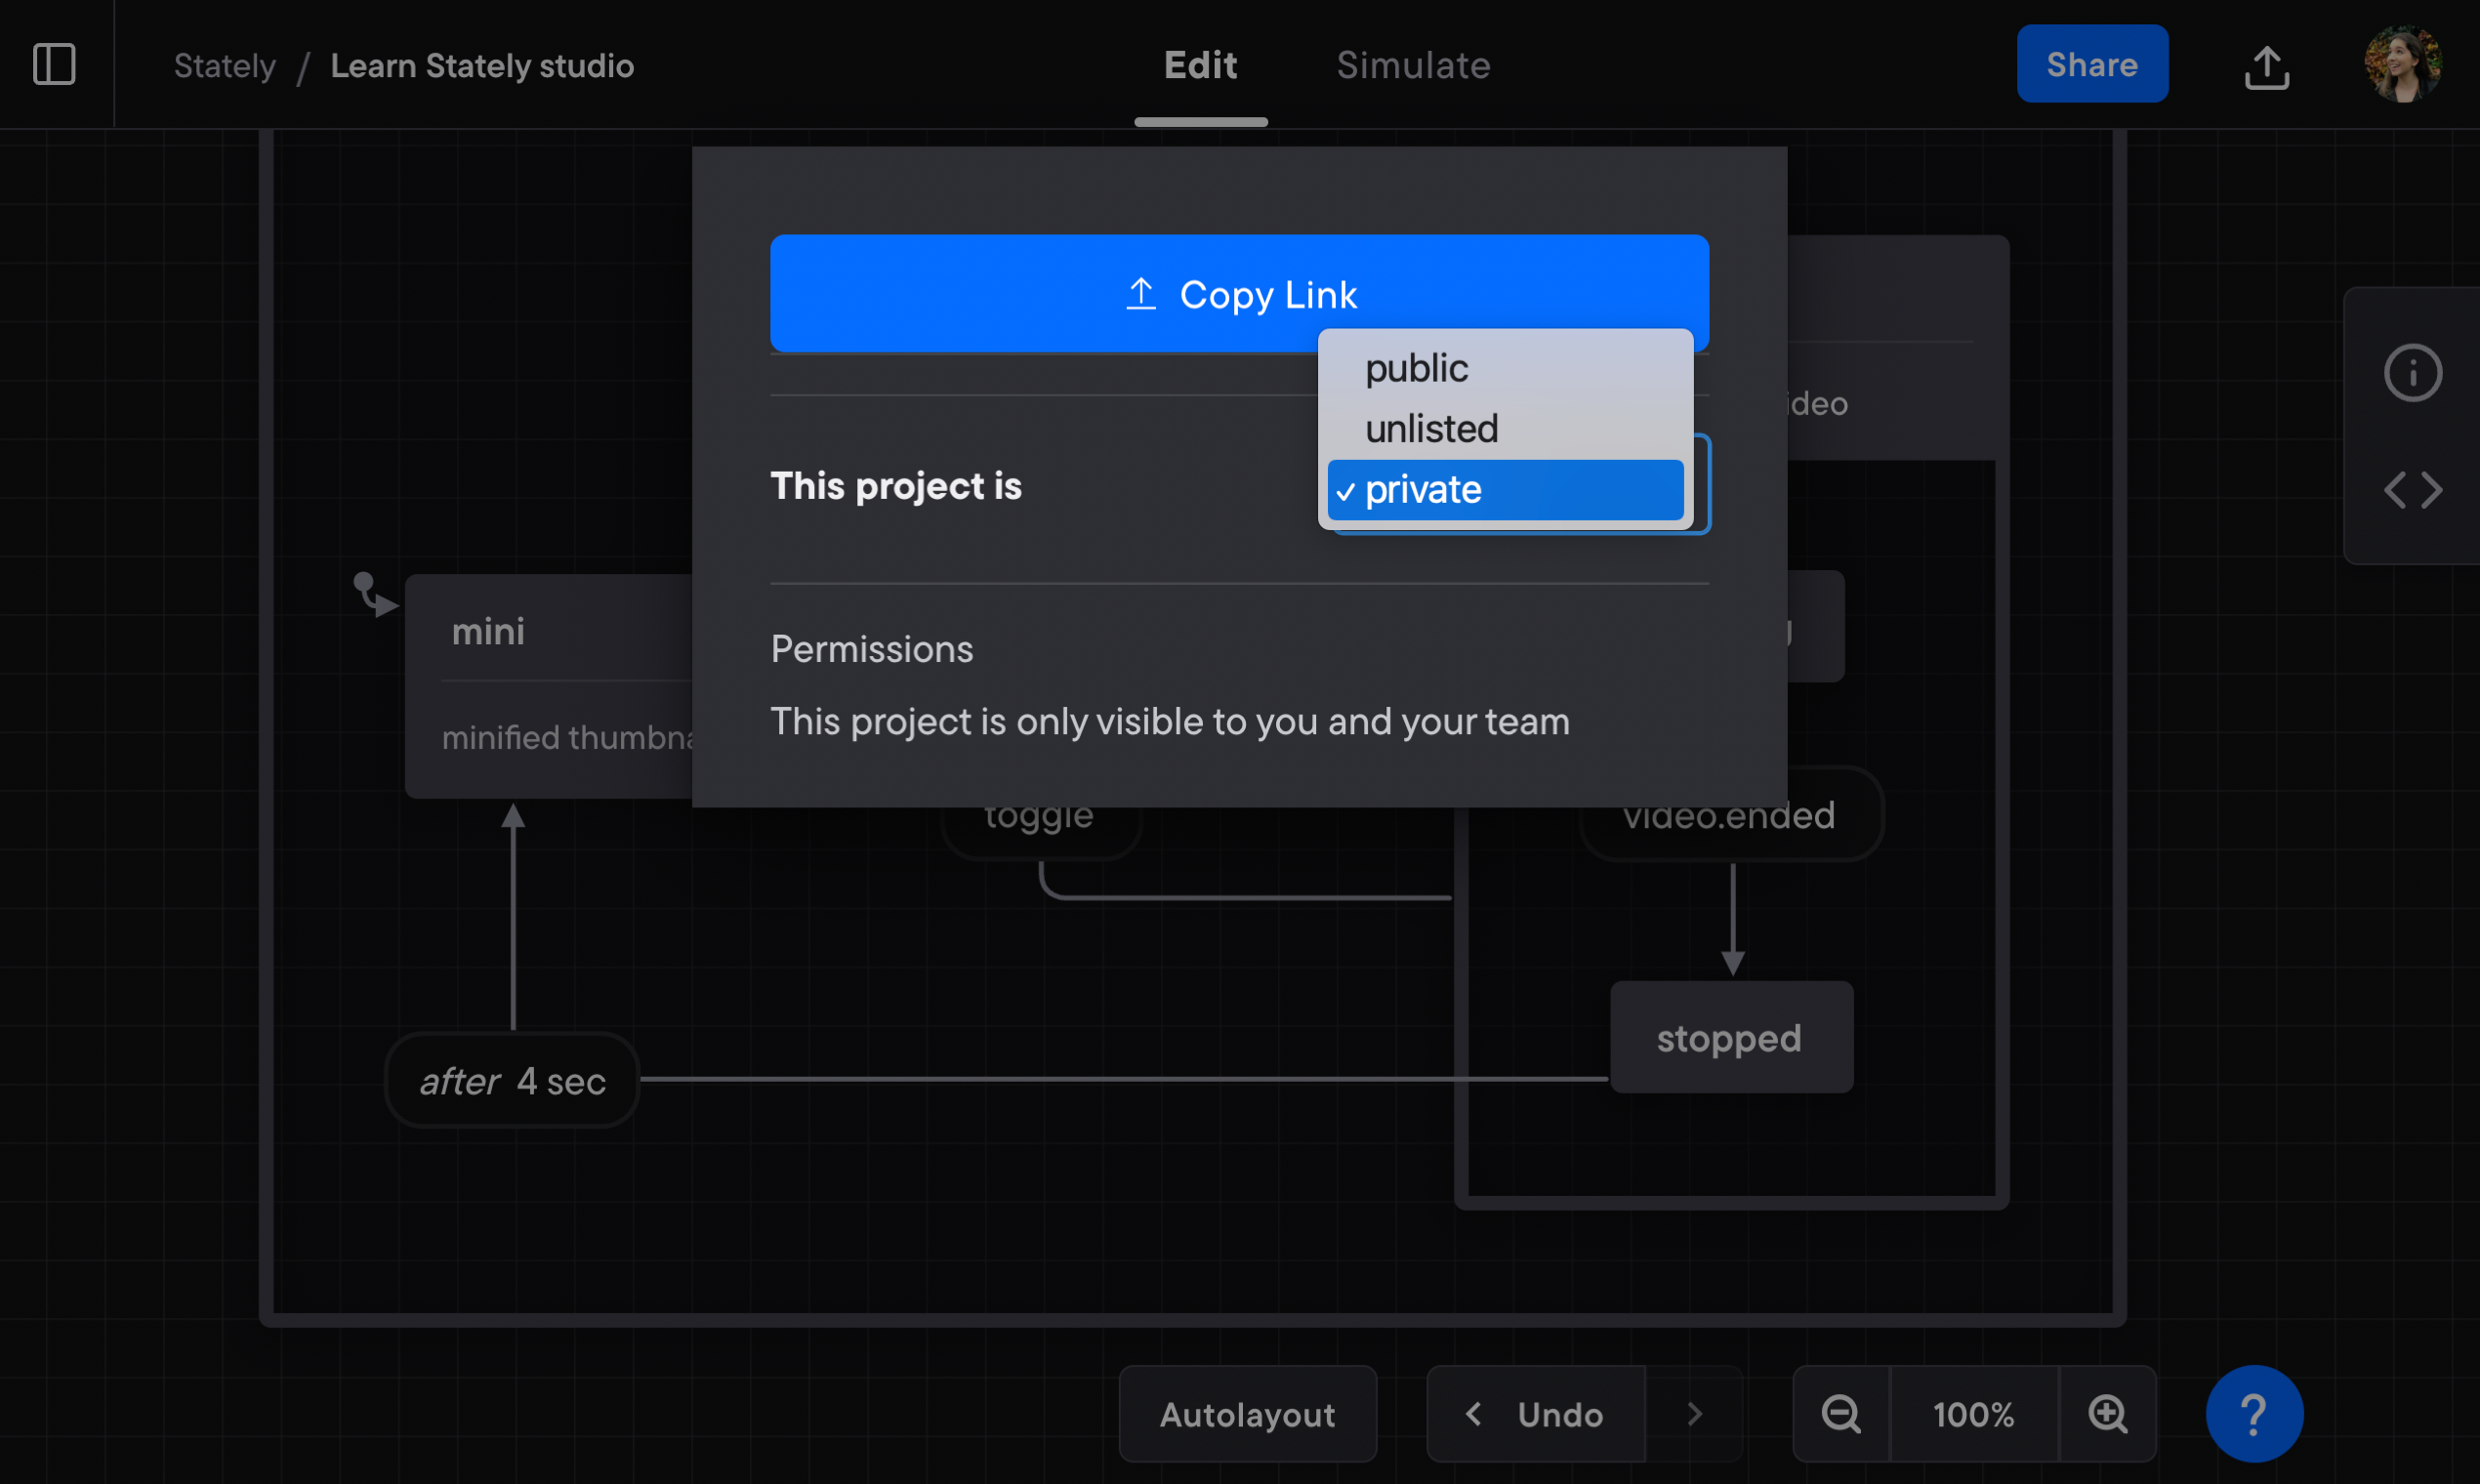 Share menu in the Stately Studio with an option to copy link, and set the project to either public, unlisted, or private. The private option is selected and Permissions text under the option states that this project is only visible to you and your team.